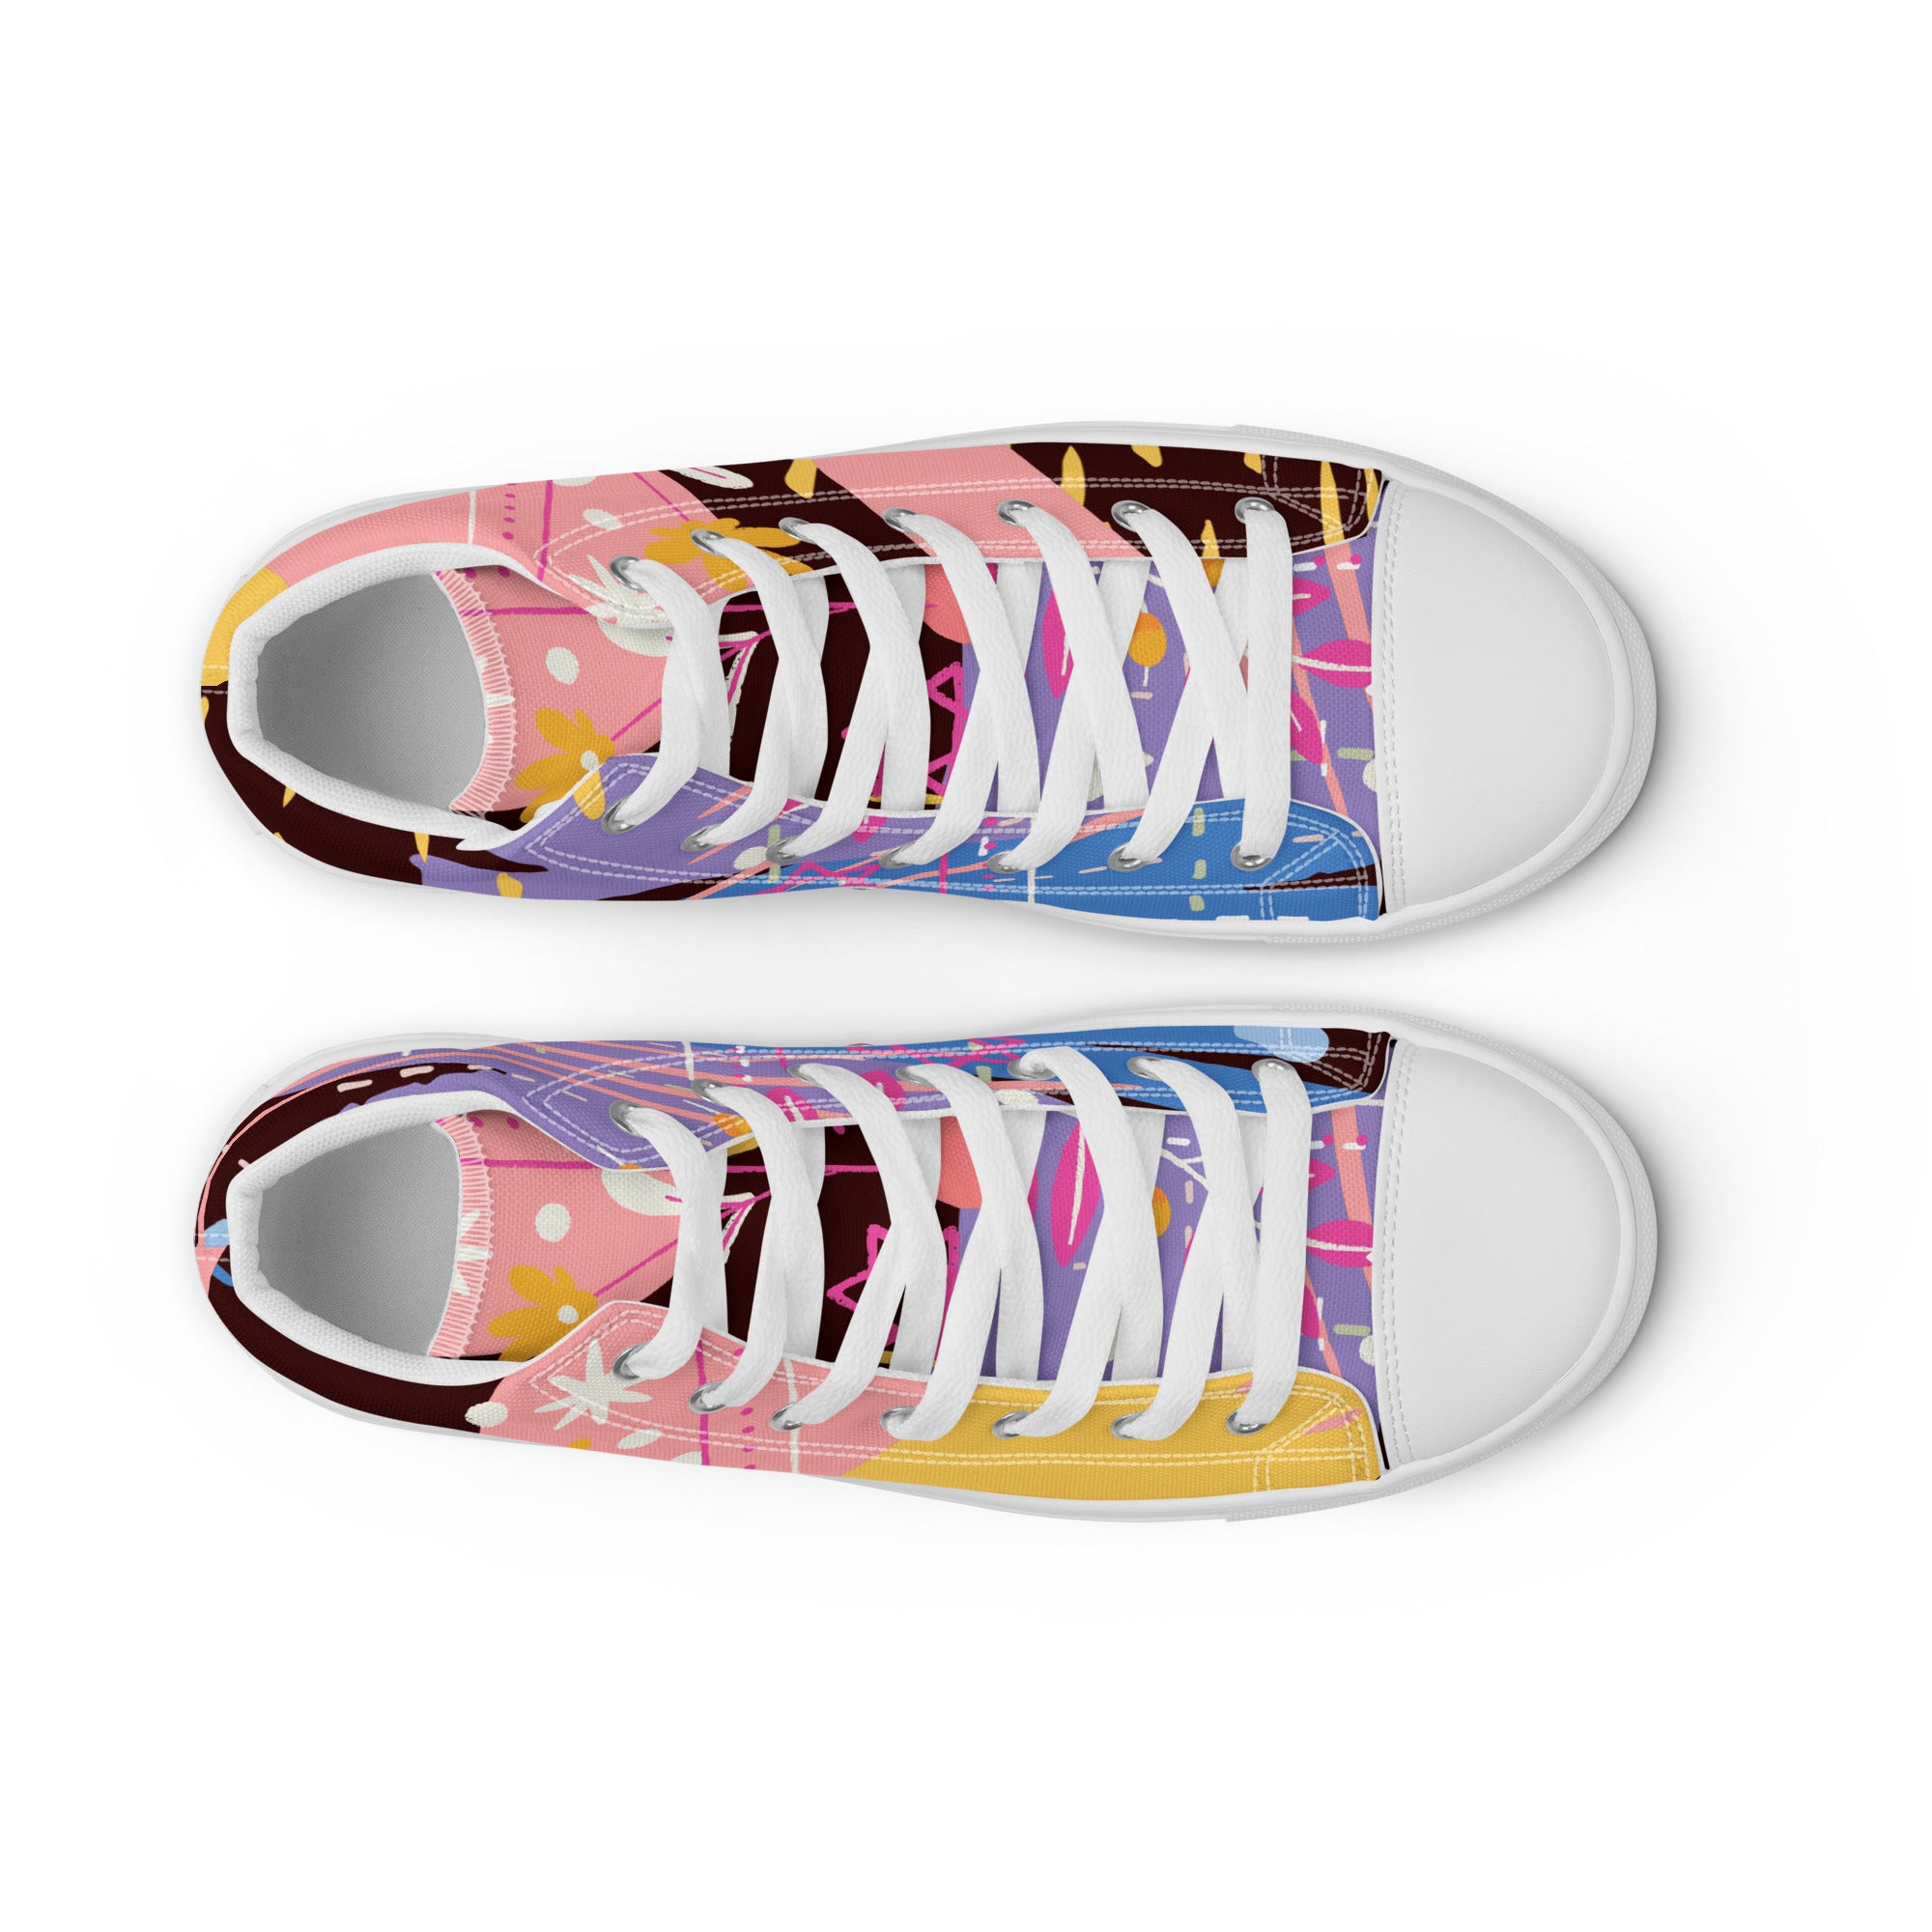 Limited edition women’s high top canvas sneaker shoes custom designer with psychedelic pattern print, perfect gift for girlfriend